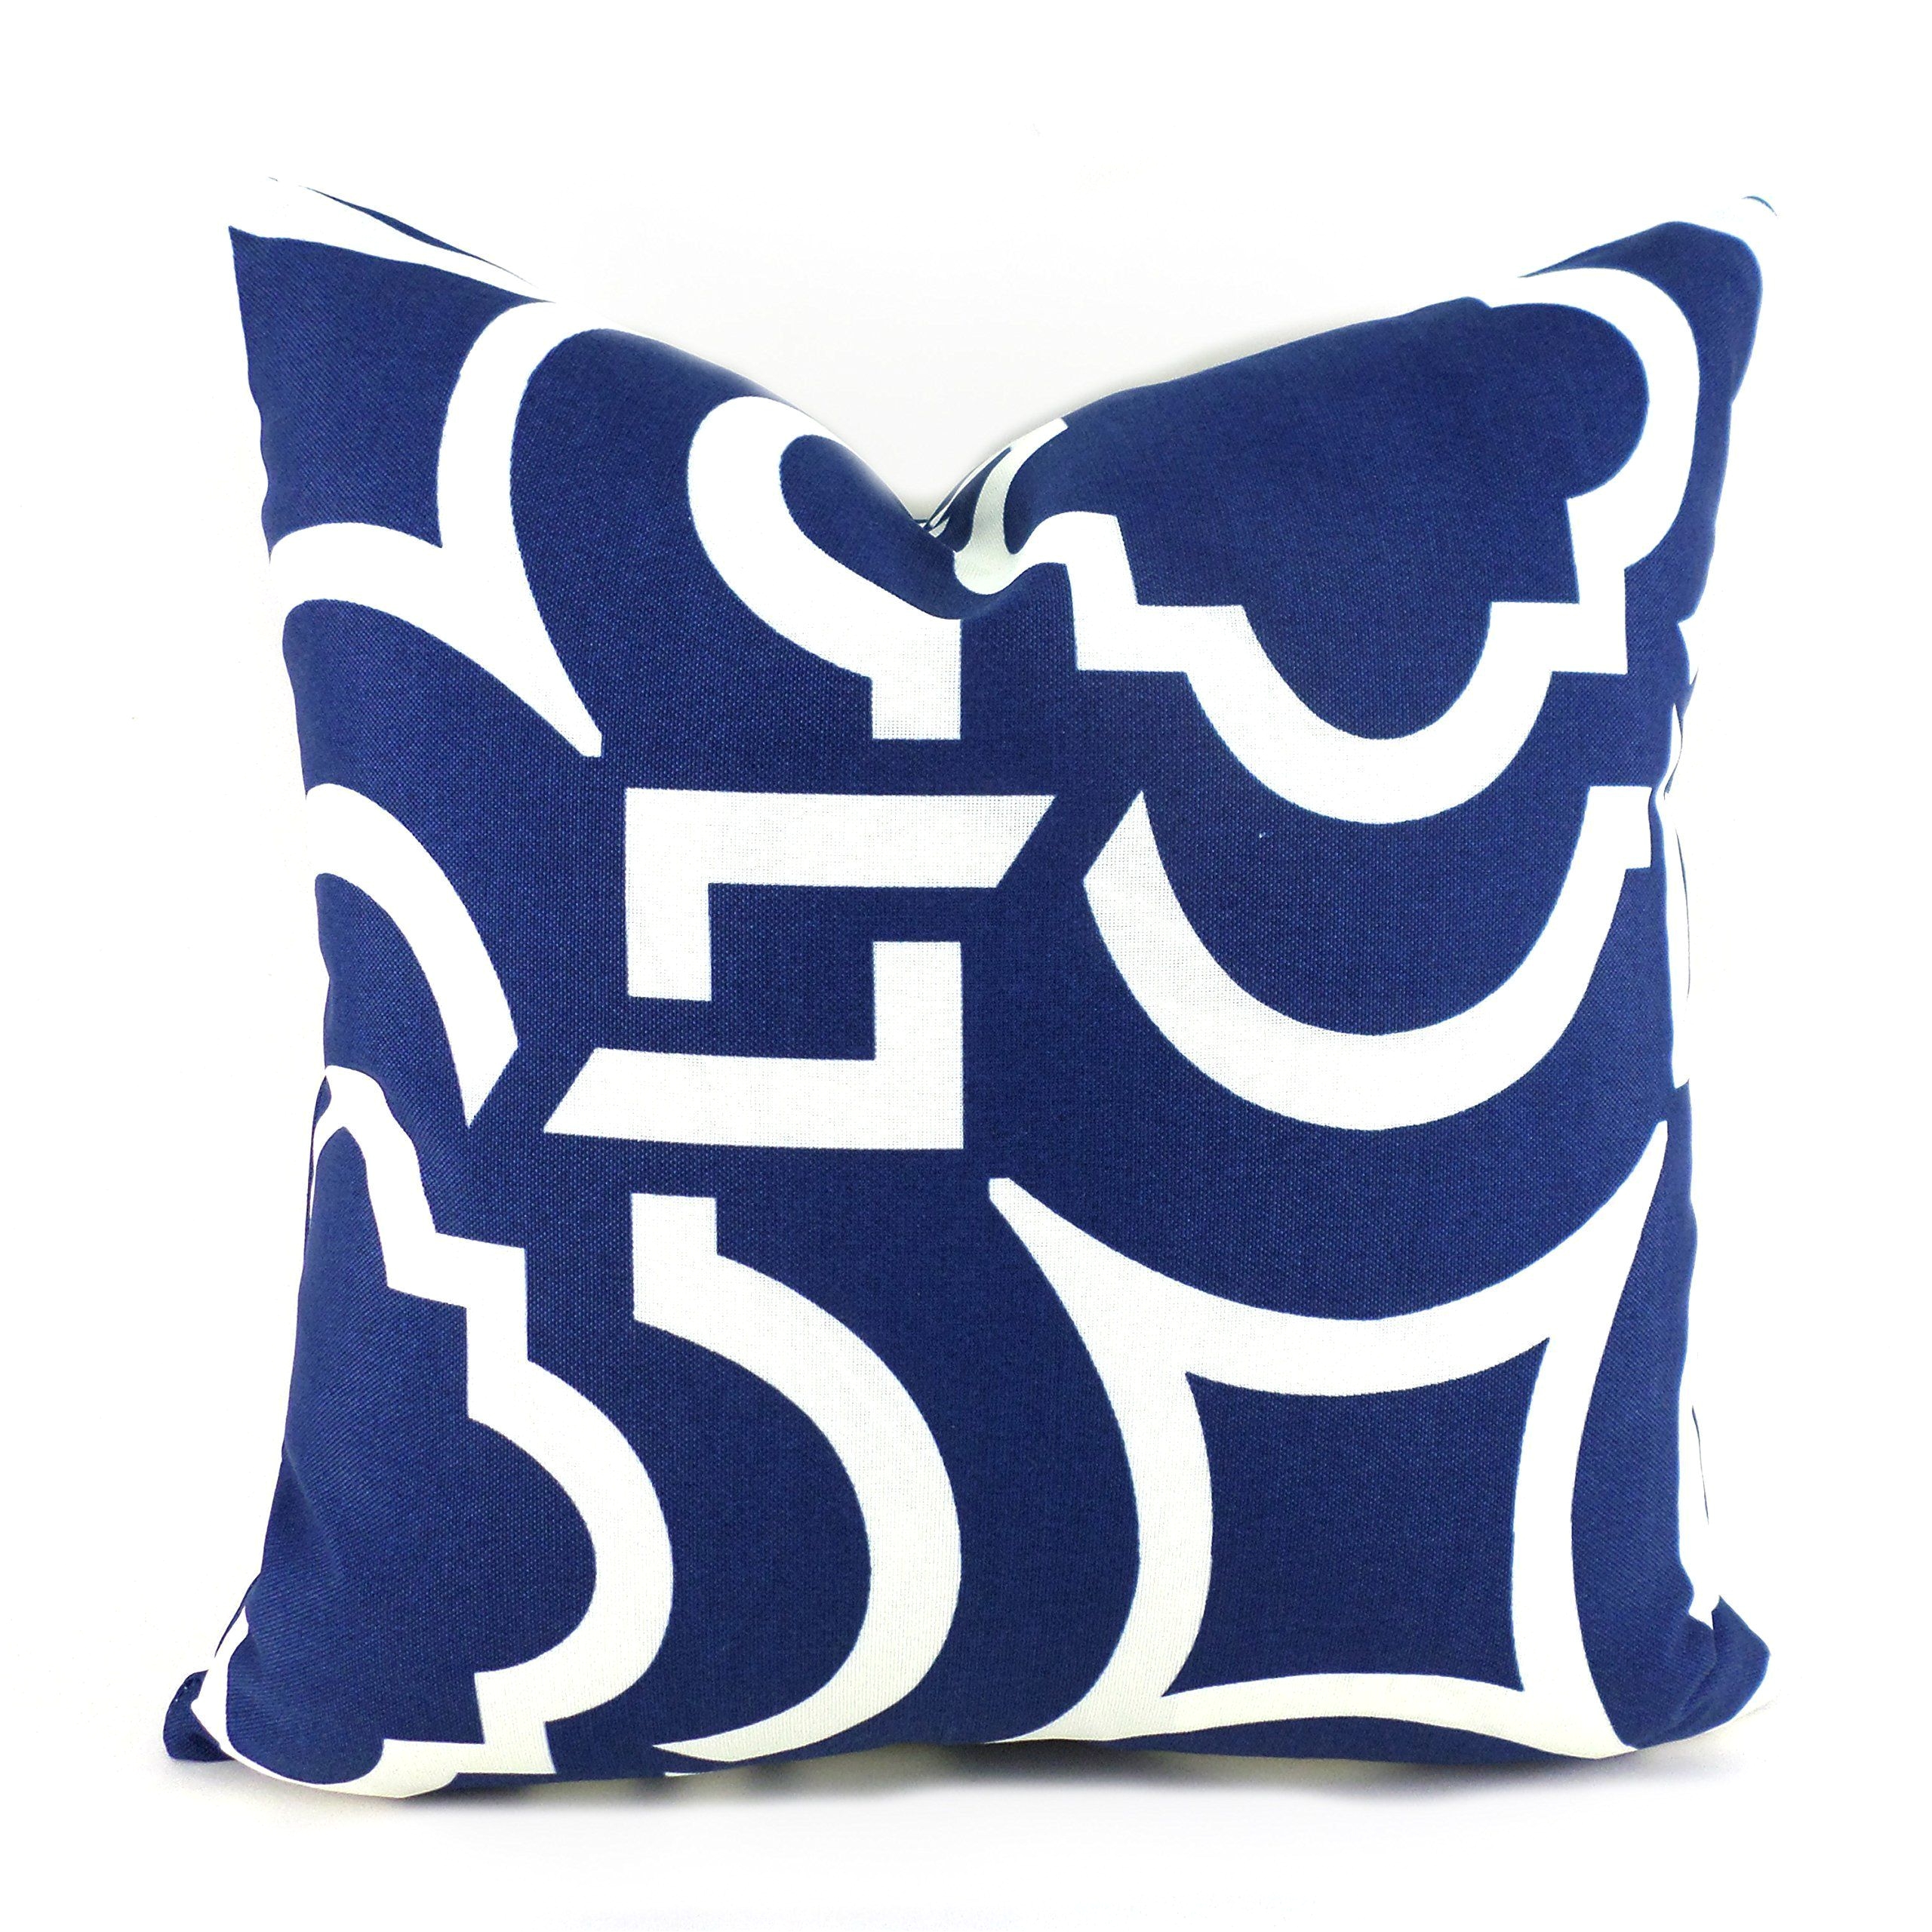 Best Place to Buy Cheap Decorative Pillows Outdoor Decorative Throw Pillow Cover Any Size Od Carmody Navy